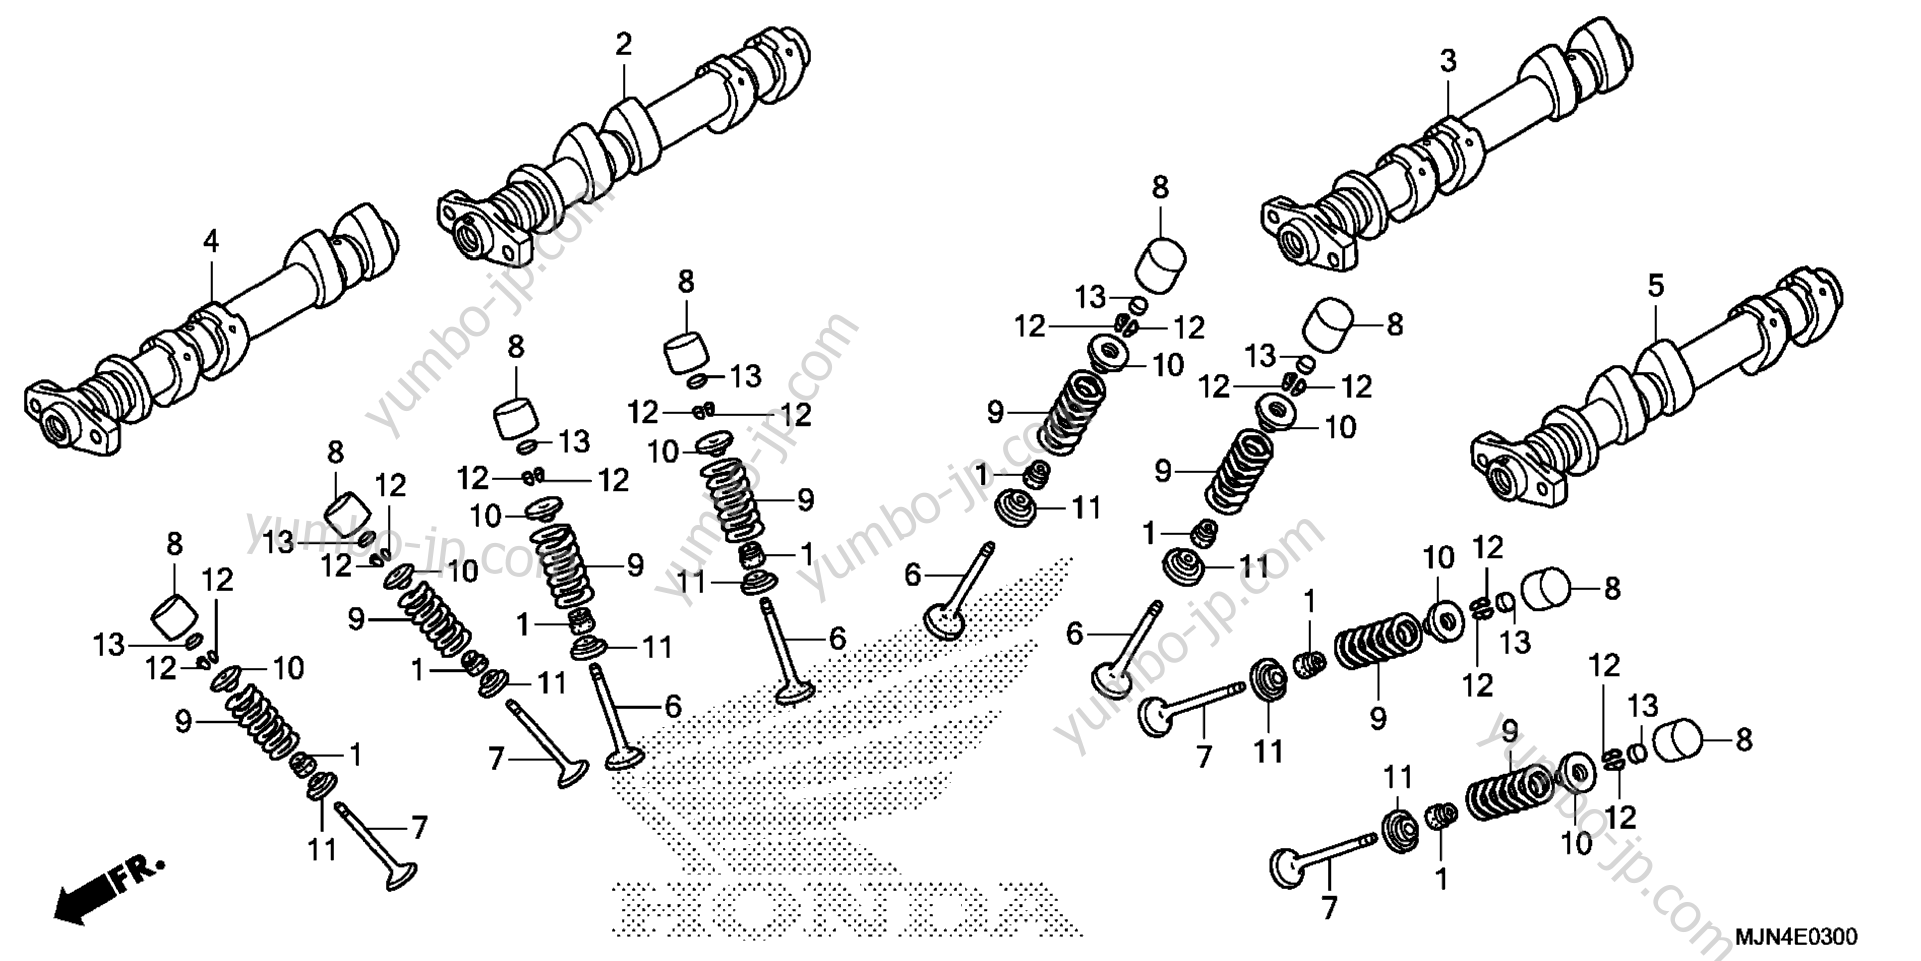 CAMSHAFT / VALVE for motorcycles HONDA CTX1300A AC 2014 year